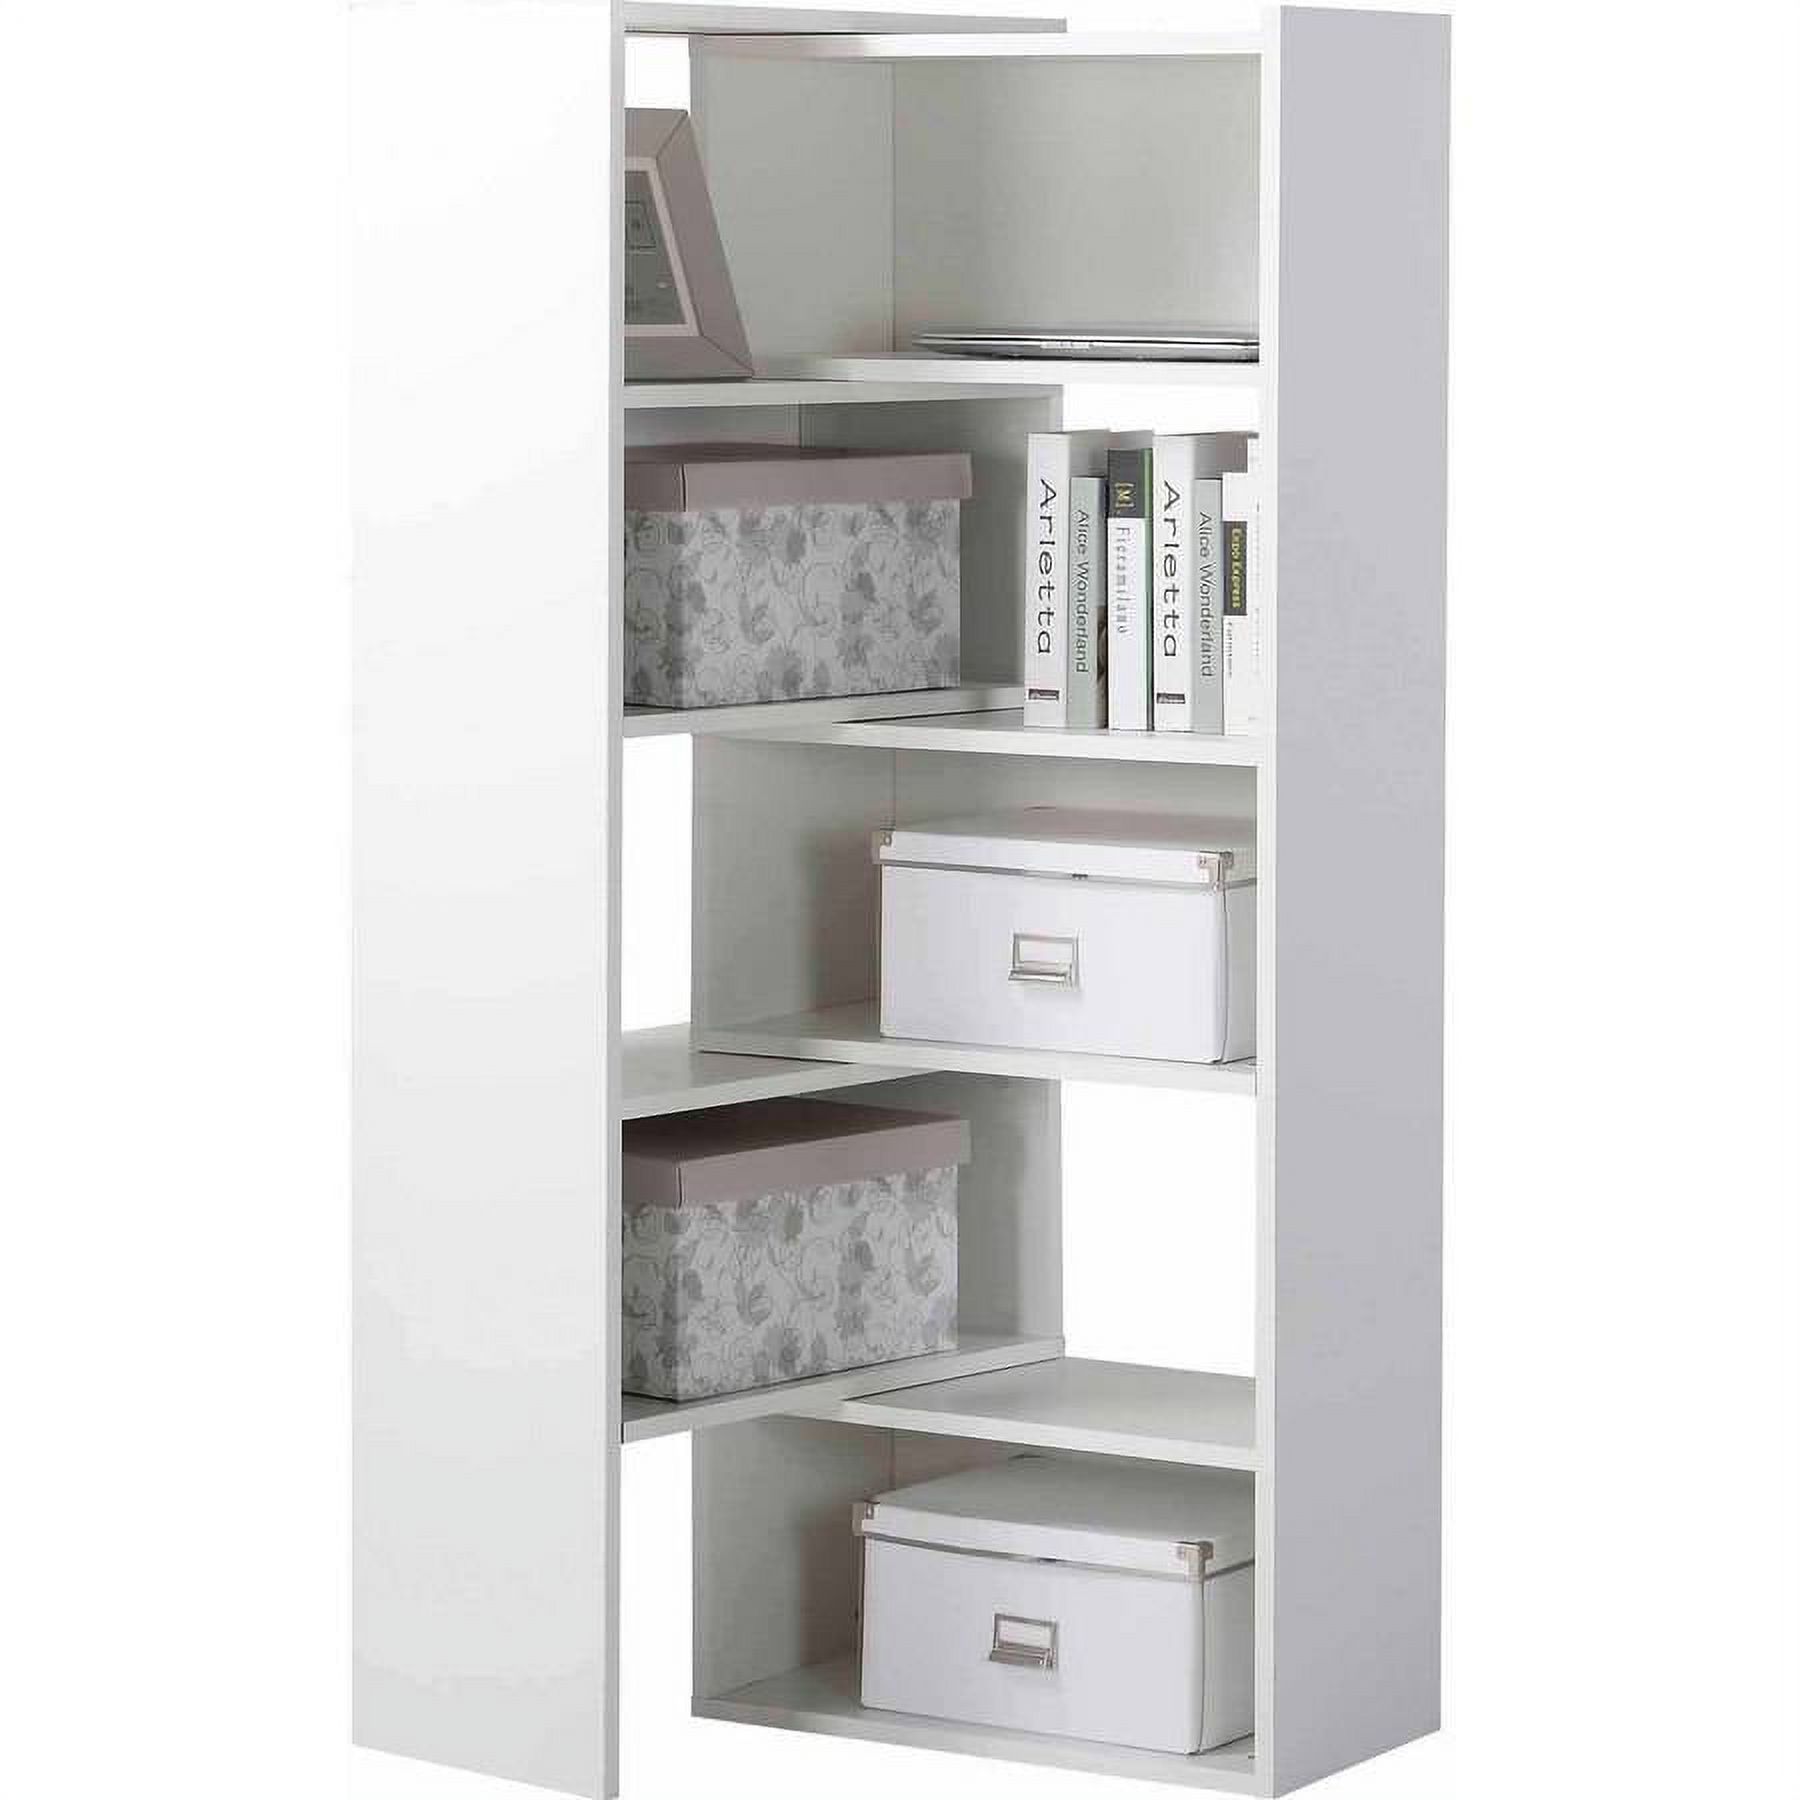 Homestar Flexible and Expandable Shelving Console, White - image 1 of 6